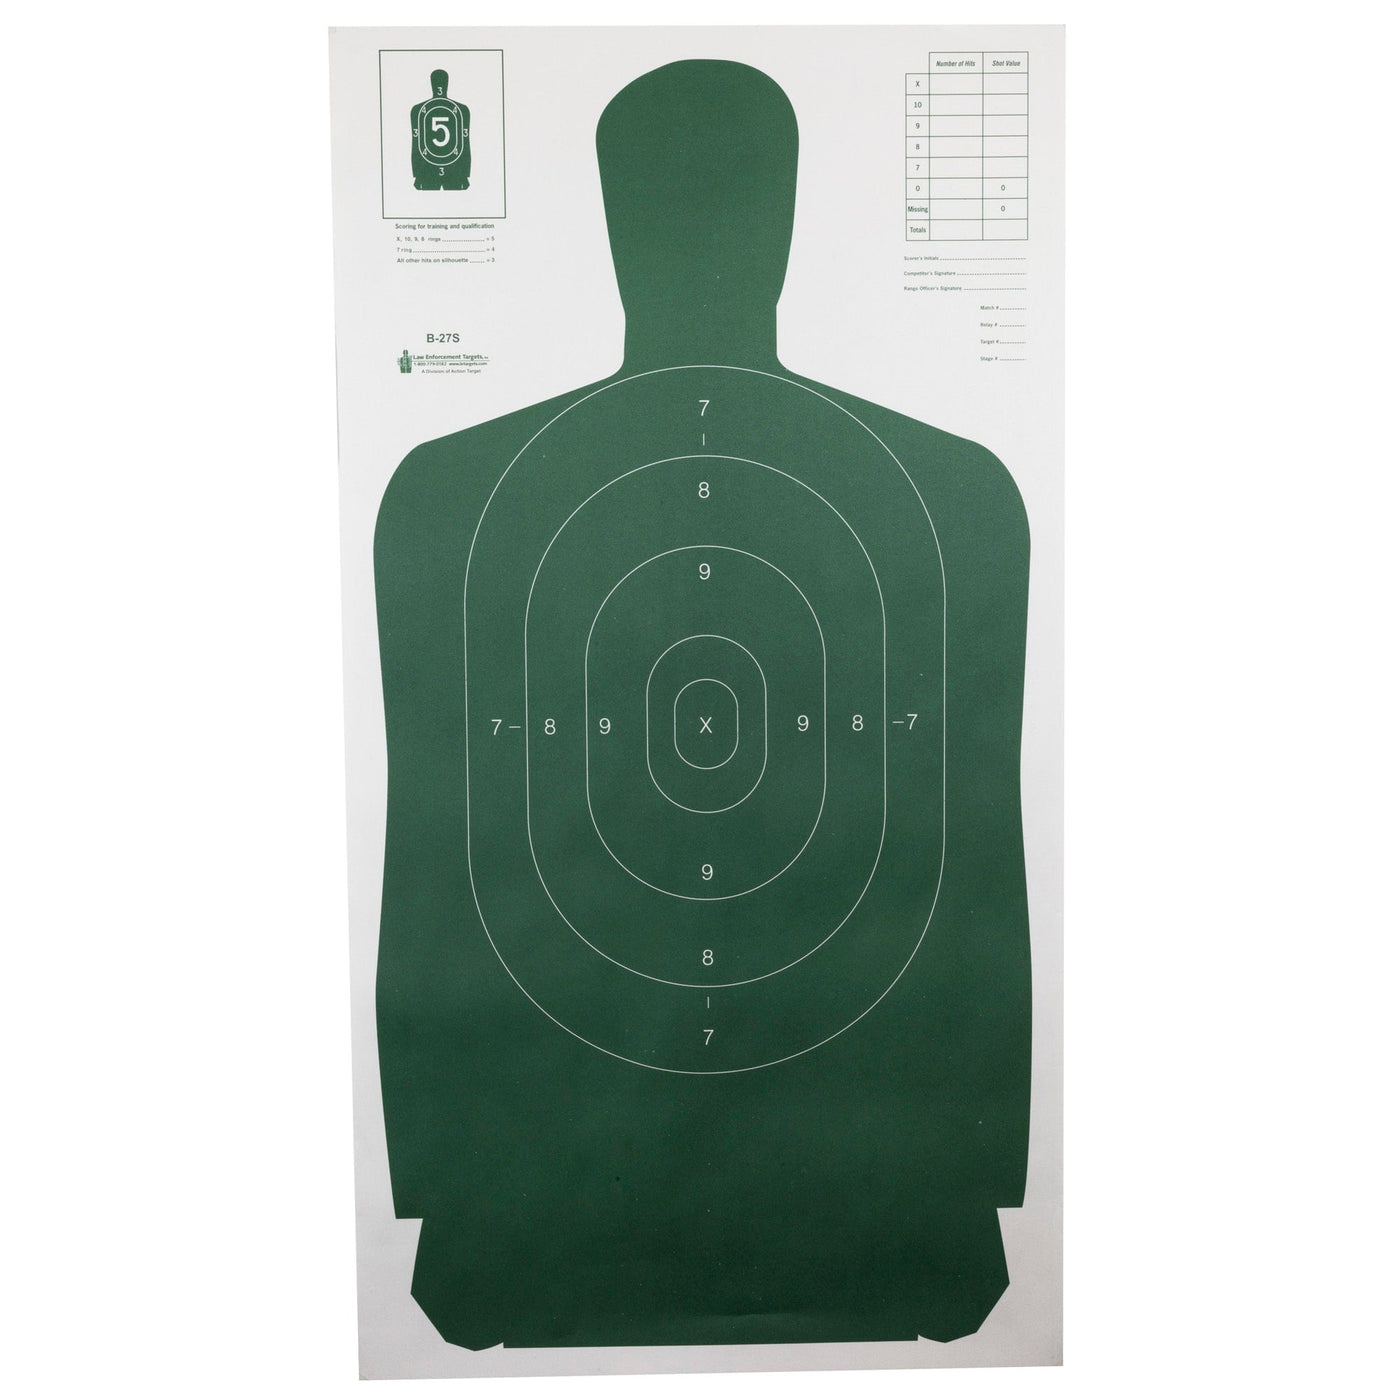 Action Target Action Tgt B27s 100pk Green Targets